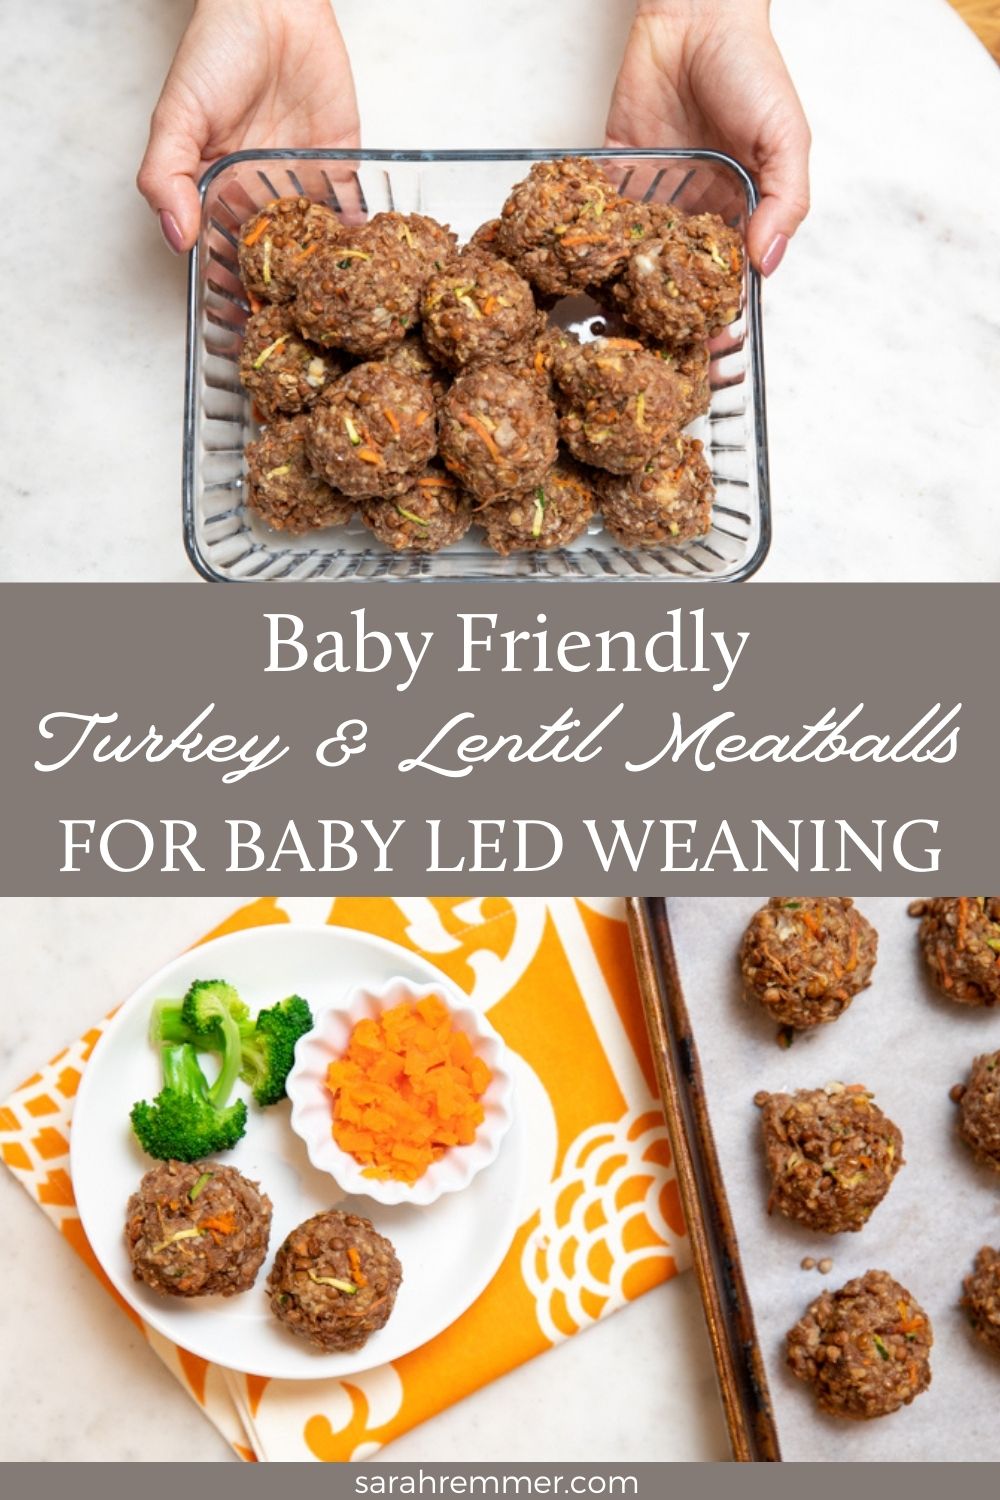 Baby Friendly Turkey and Lentil Meatballs for BLW